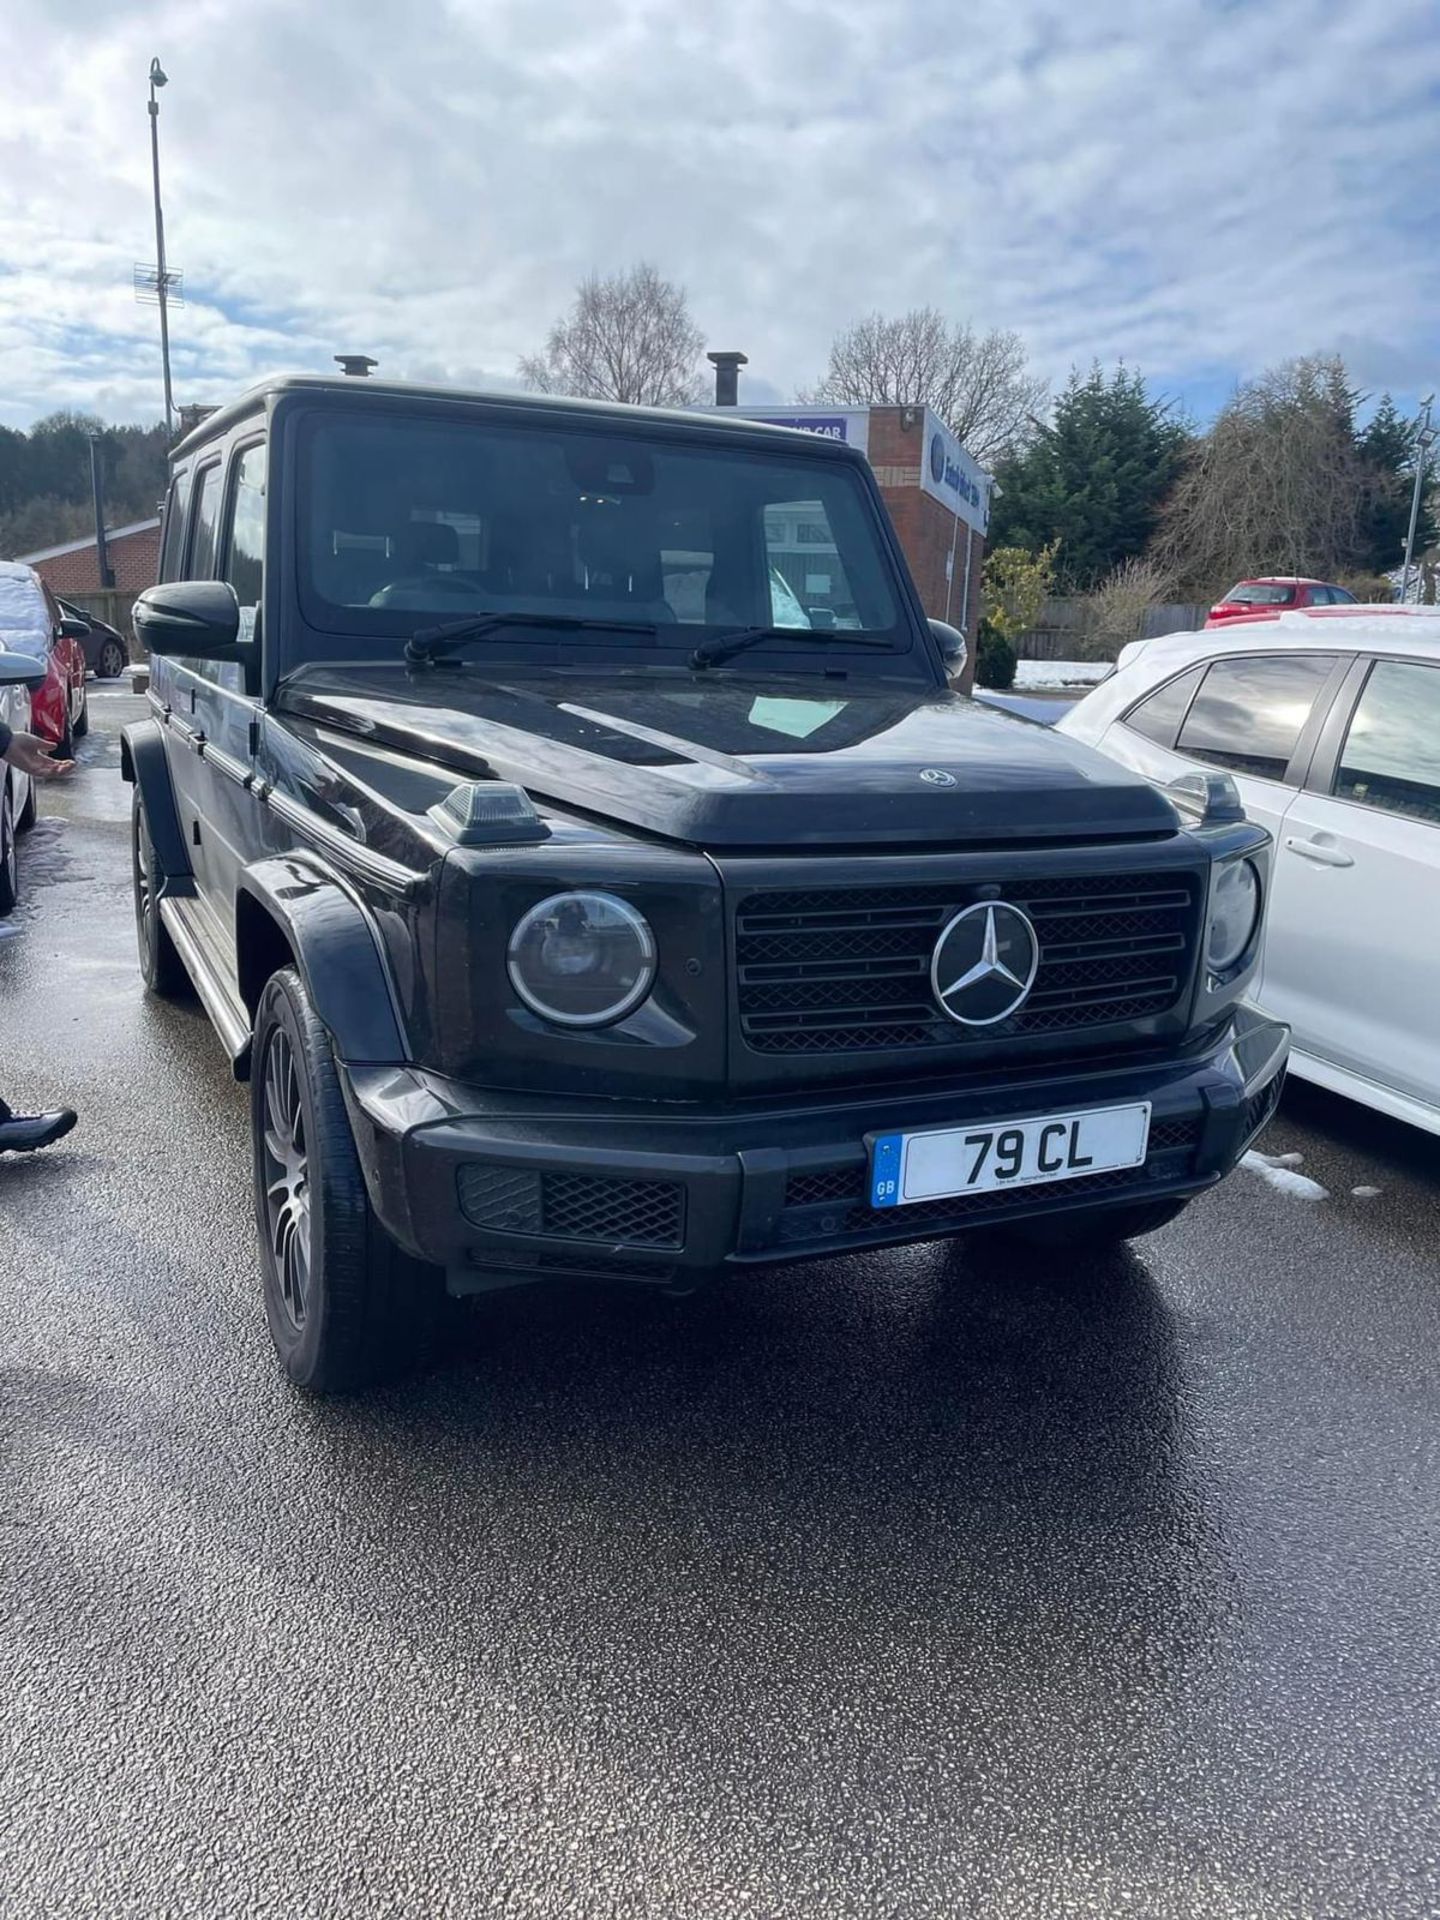 2019/19 REG MERCEDES-BENZ G350 AMG LINE PREMIUM D 4M AUTOMATIC RARE 7 SEAT, SHOWING 0 FORMER KEEPERS - Image 2 of 9